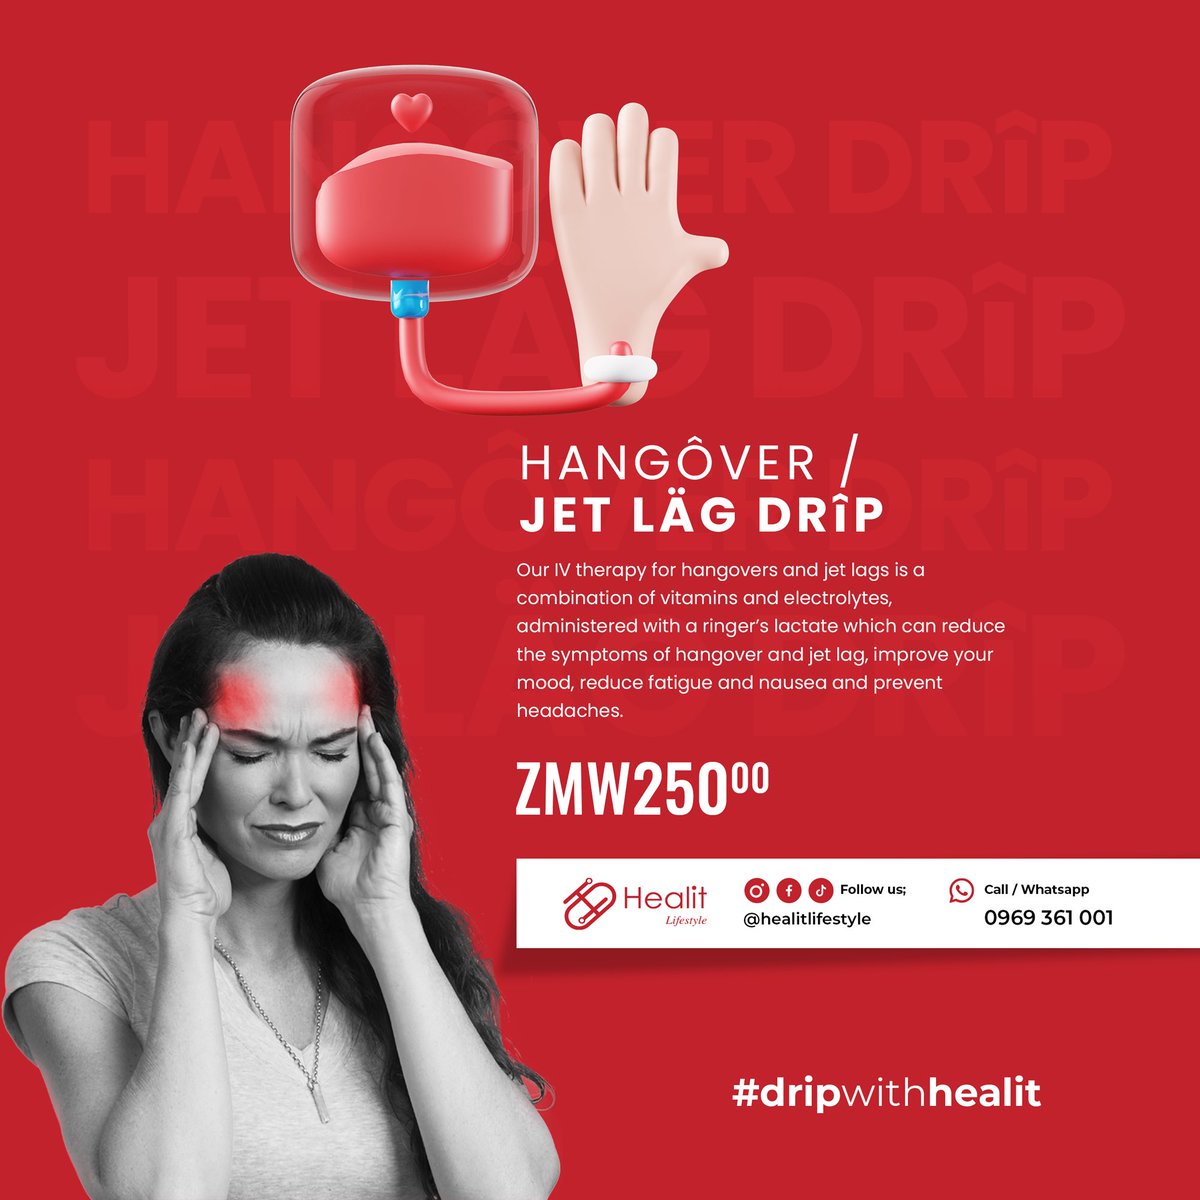 Say goodbye to hangover or jet lag within minutes. Get hangover drip and show up like a BOSS, no Monday blues 🙅🏾‍♂️

📞 0969 361 001

#healitzambia #hangoverdrip #jetlag #ivtherapy